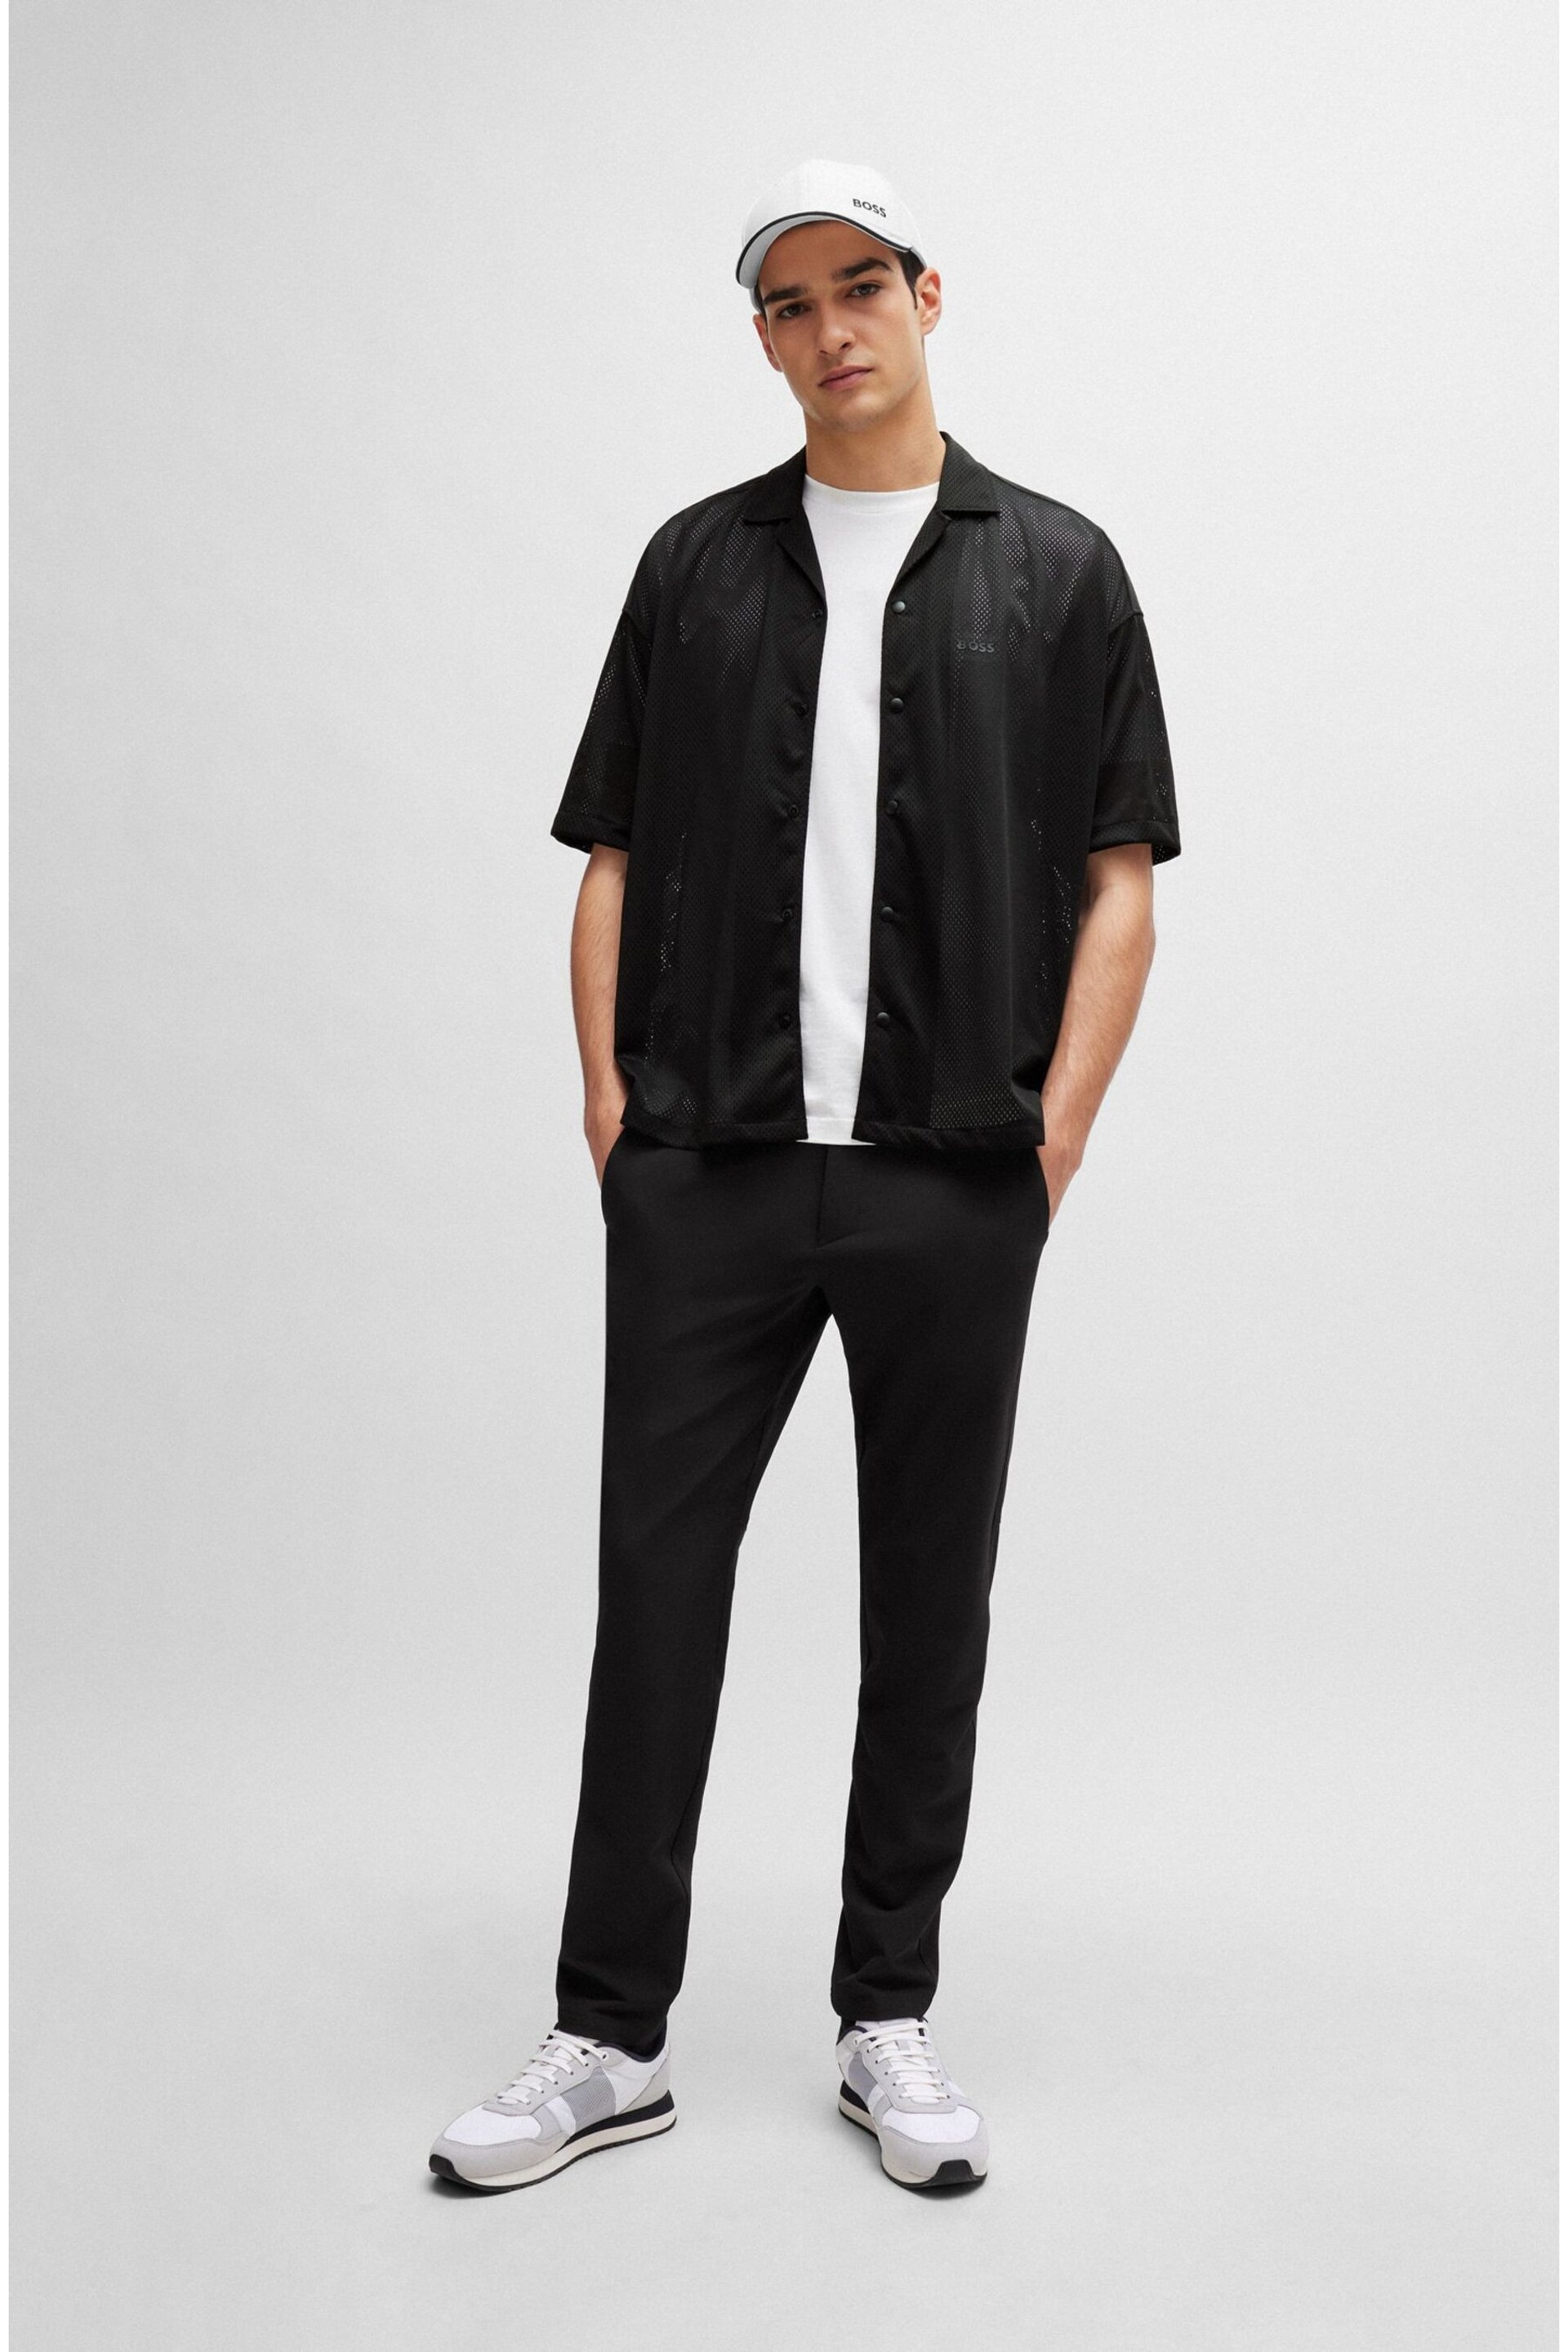 BOSS Black Relaxed-Fit Shirt in Jersey Mesh With Camp Collar - Image 3 of 6